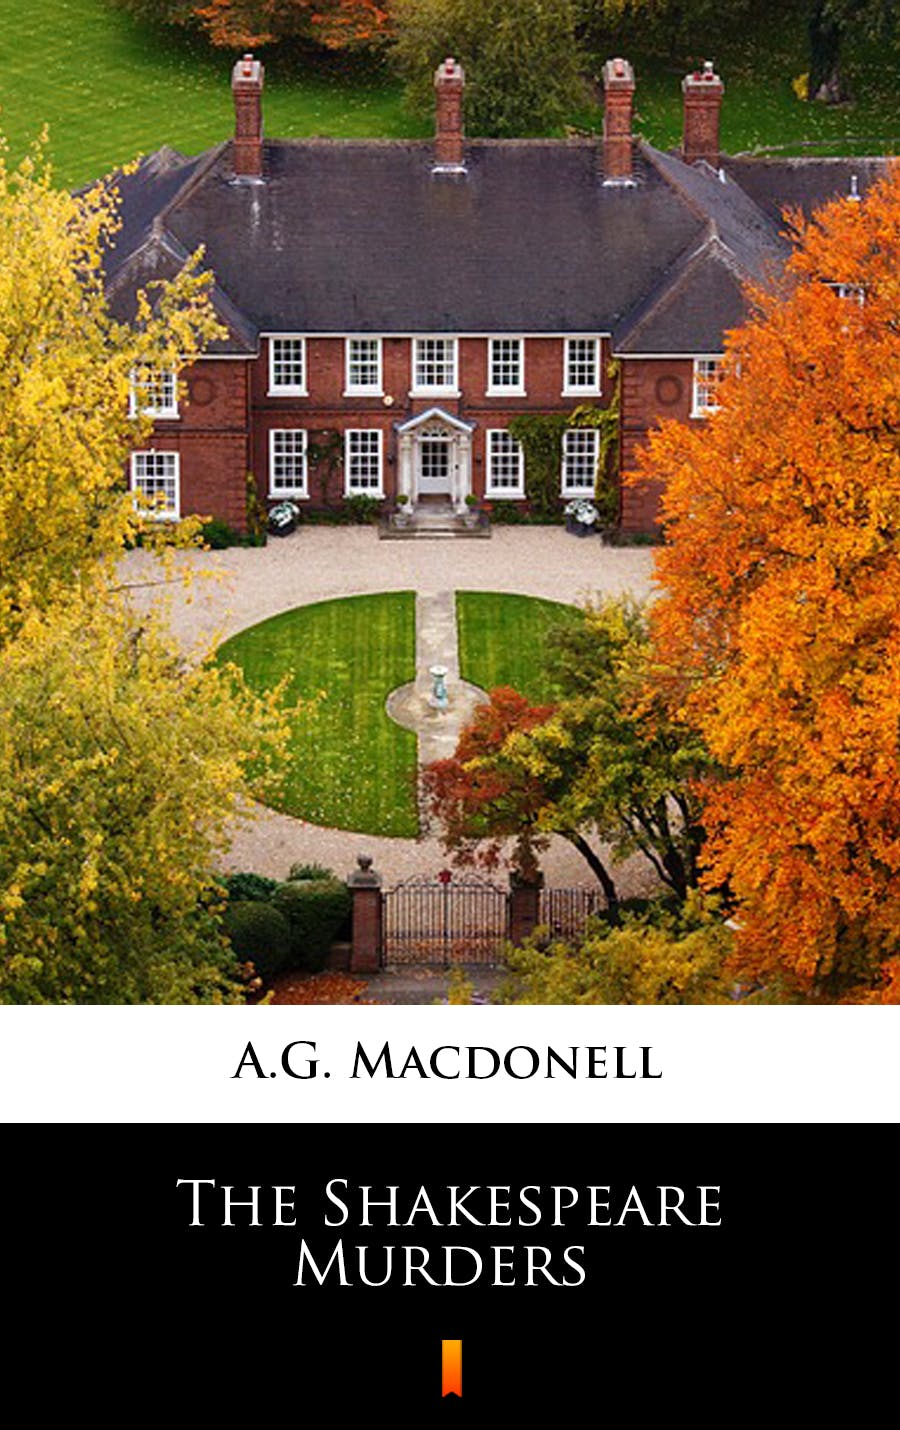 The Shakespeare Murders - A.G. Macdonell